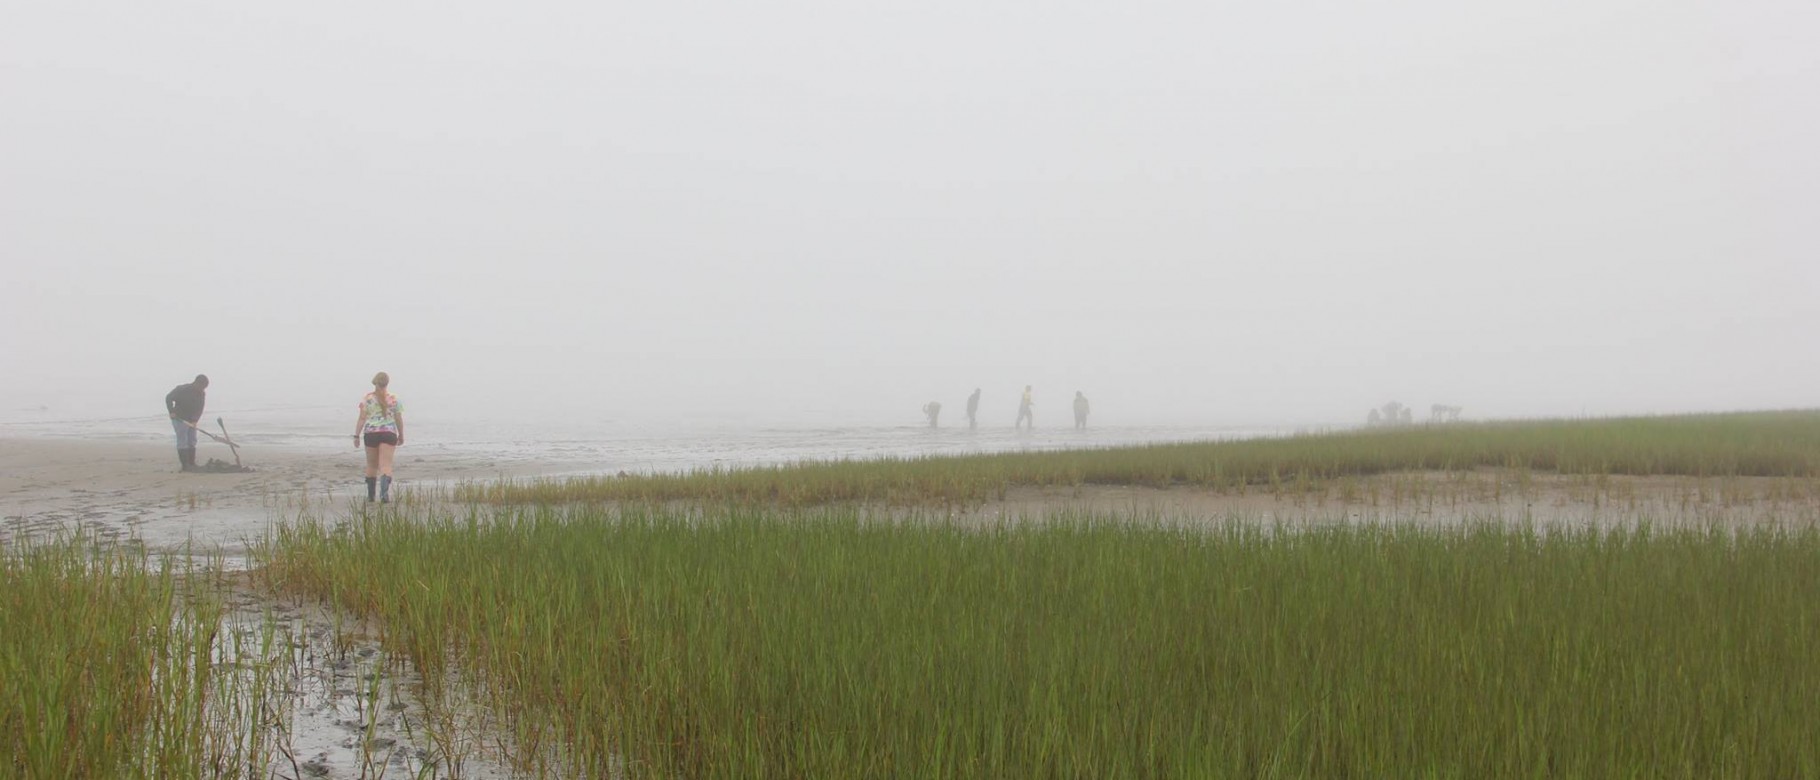 Early College students in the Coastal Marine program get their hands (and feet) dirty while studying the mud flats